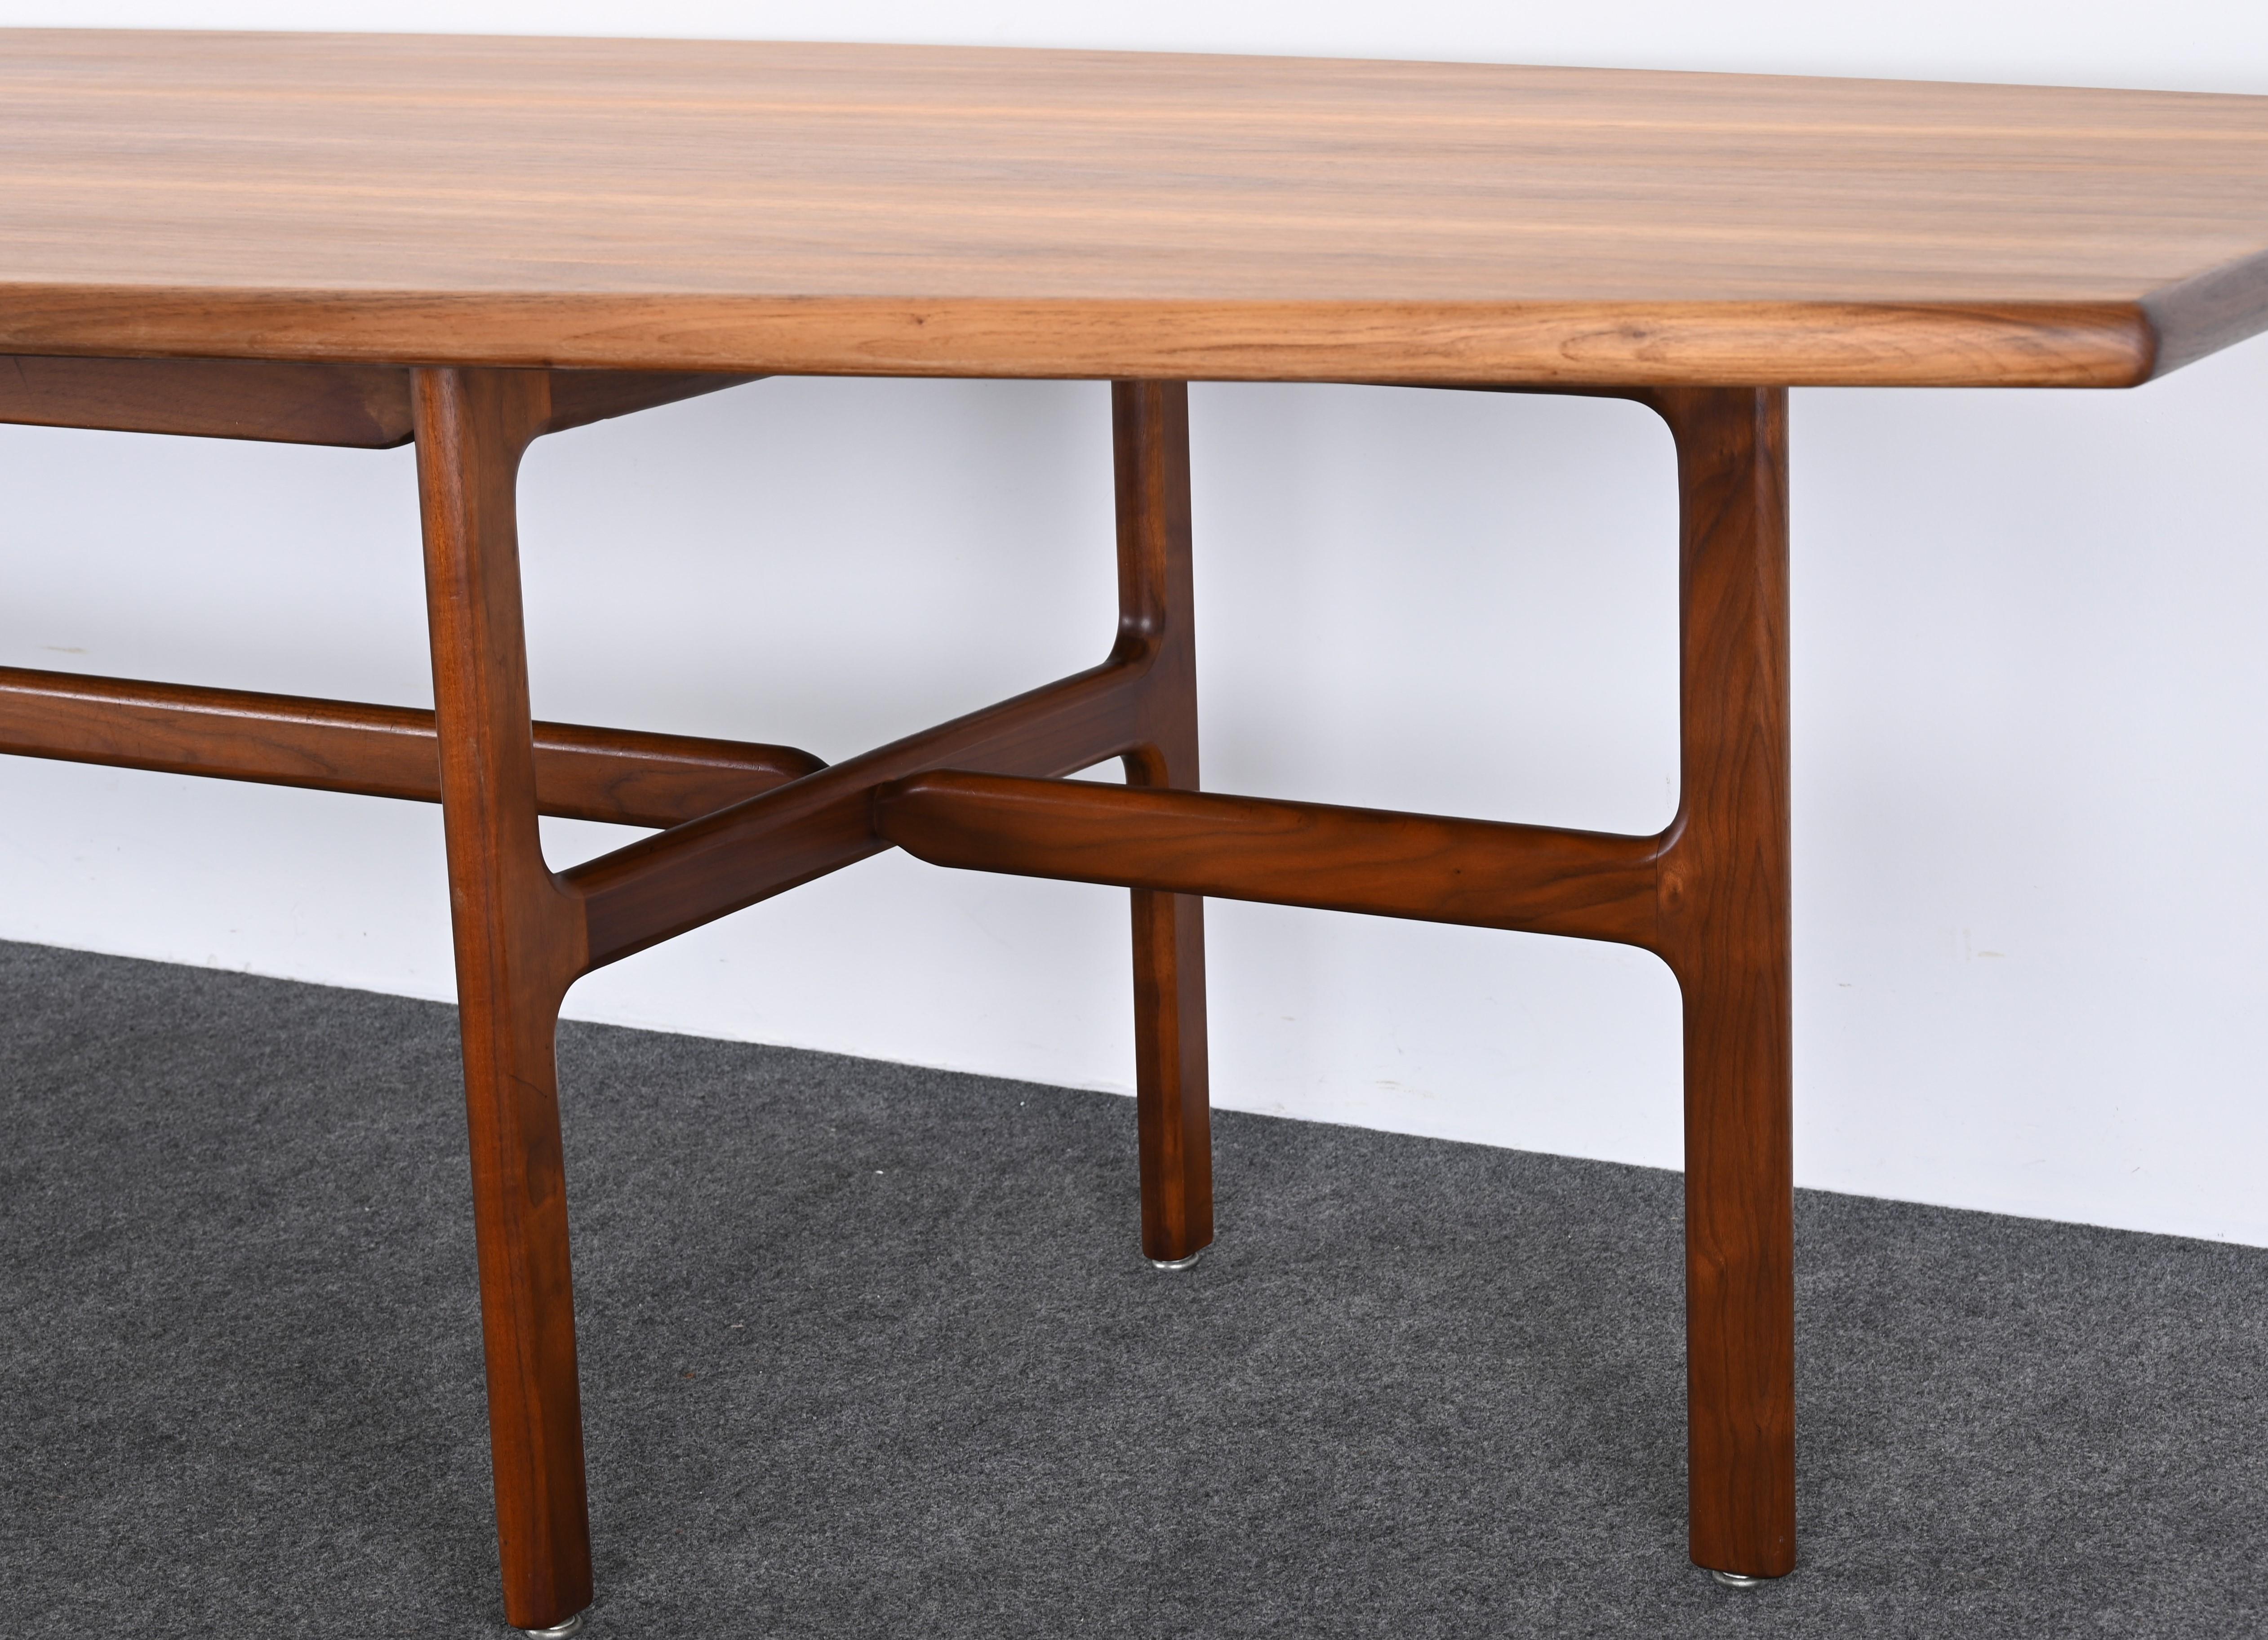 Mid-20th Century Conference Table or Dining Table by Jens Risom, 1963